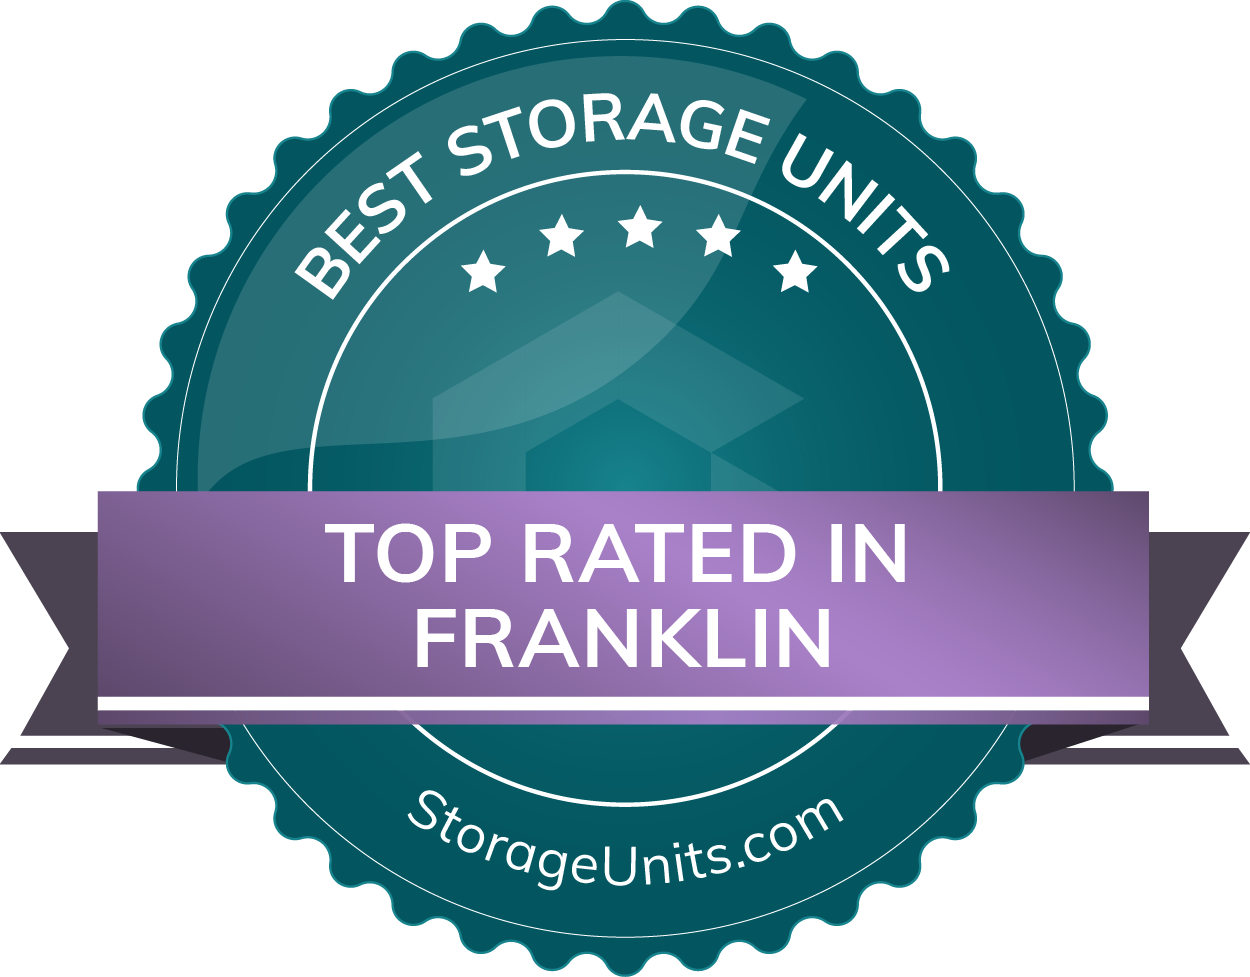 Best Storage Units Top Rated in Franklin.